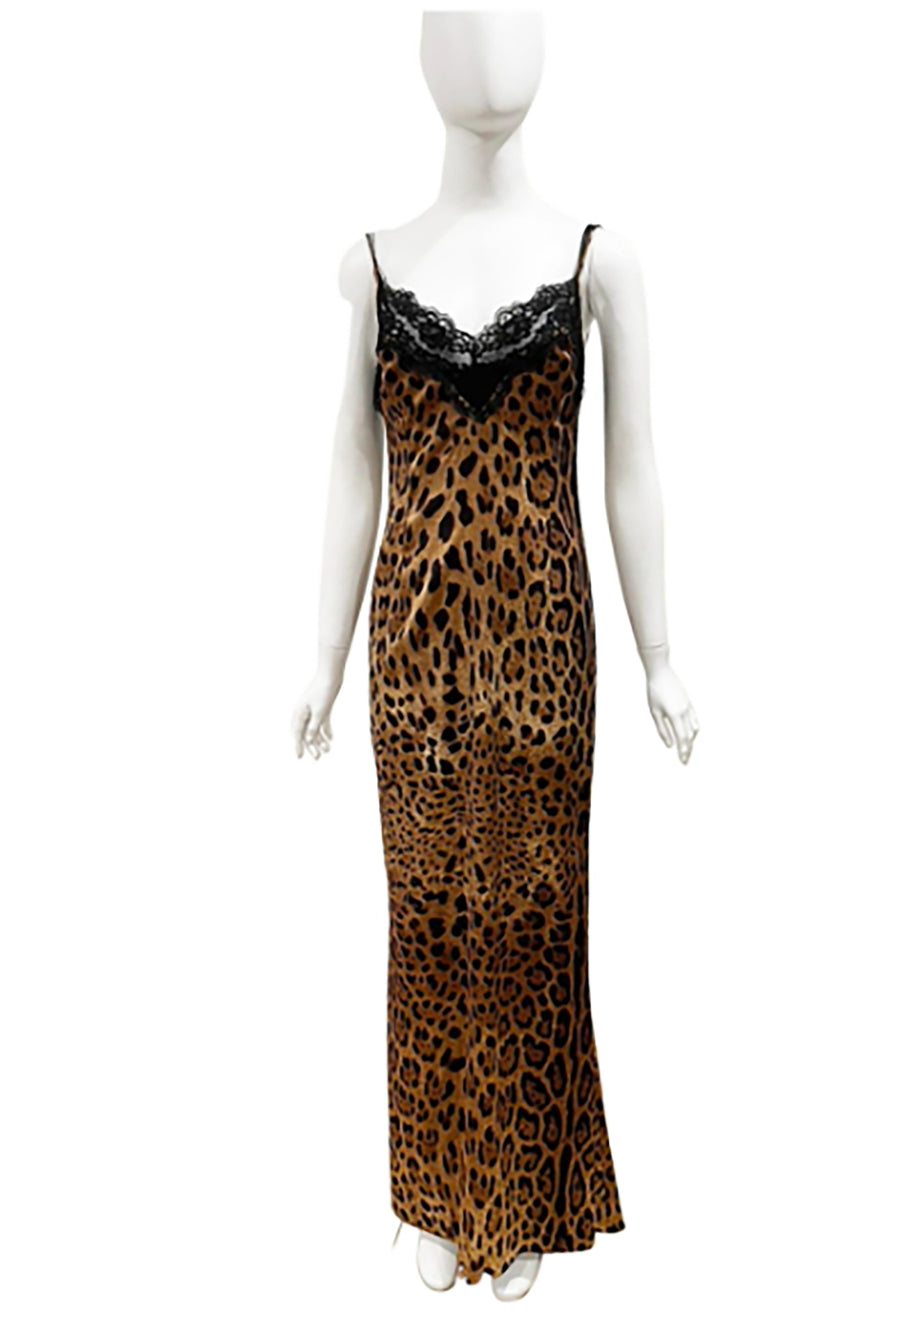 2010 Dolce & Gabbana silk leopard gown with Lace